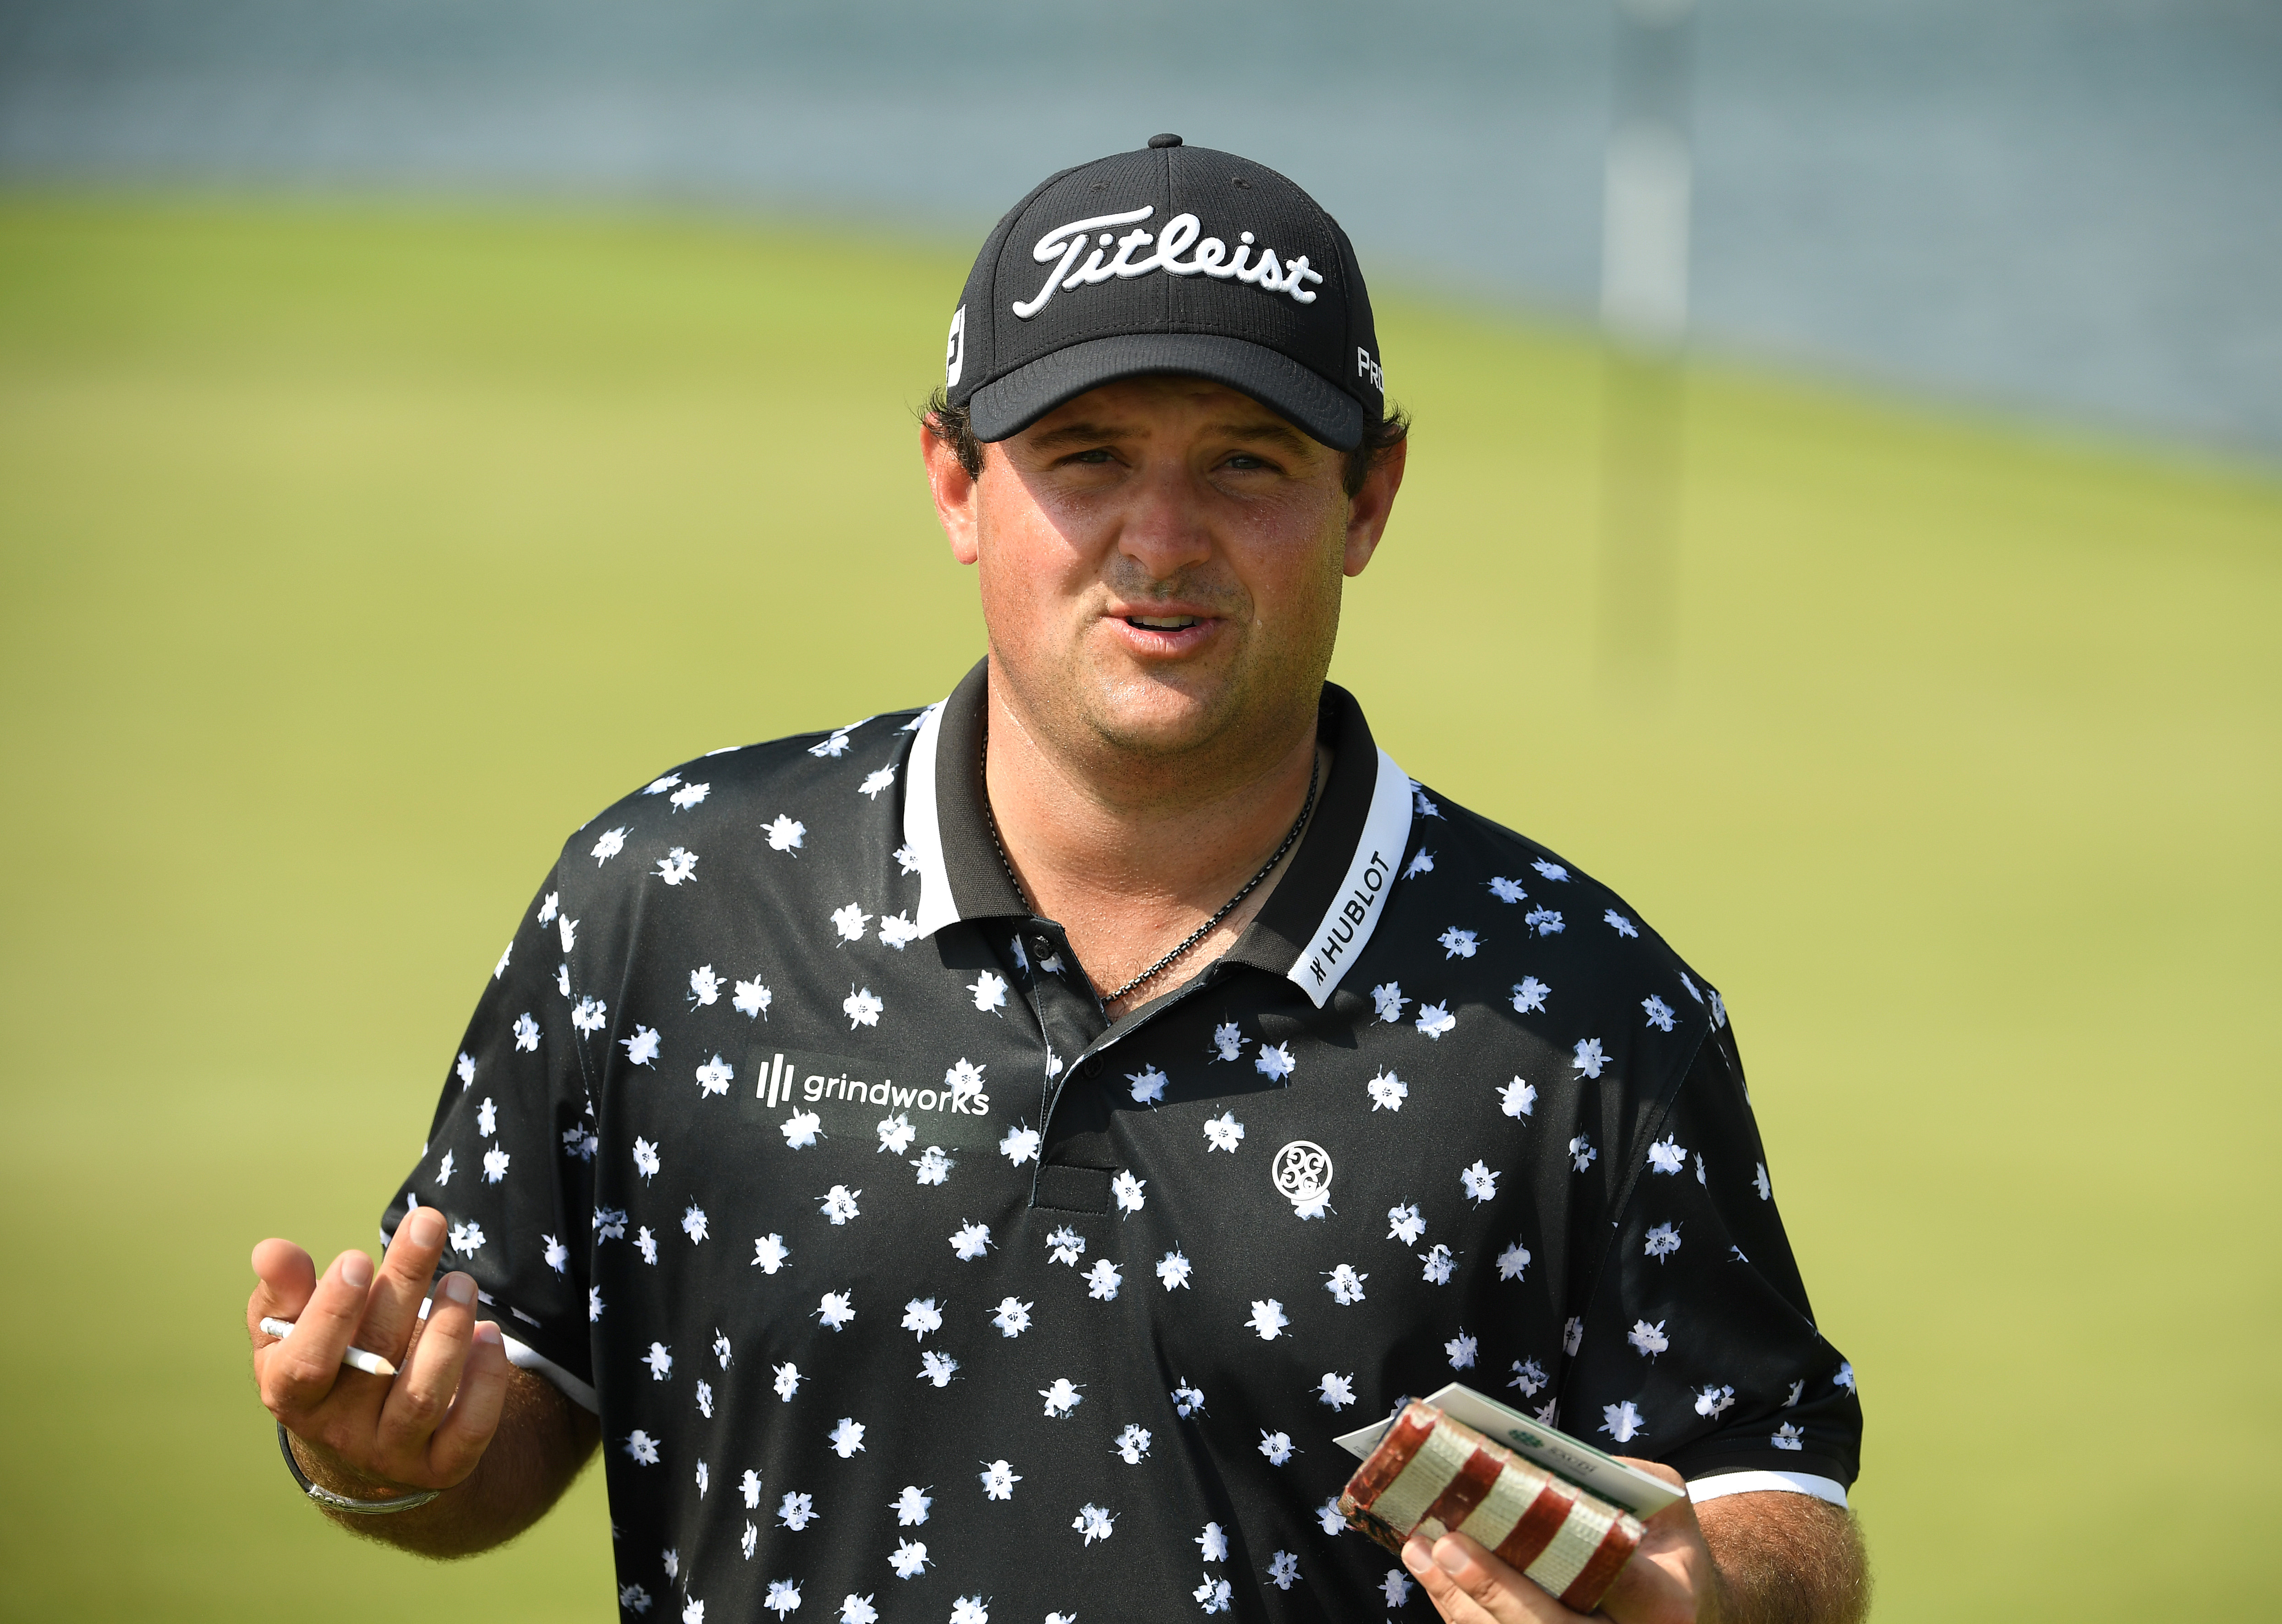 Patrick Reed’s Burner Account on Twitter Has Implicated Itself in His Recent Cheating Scandal